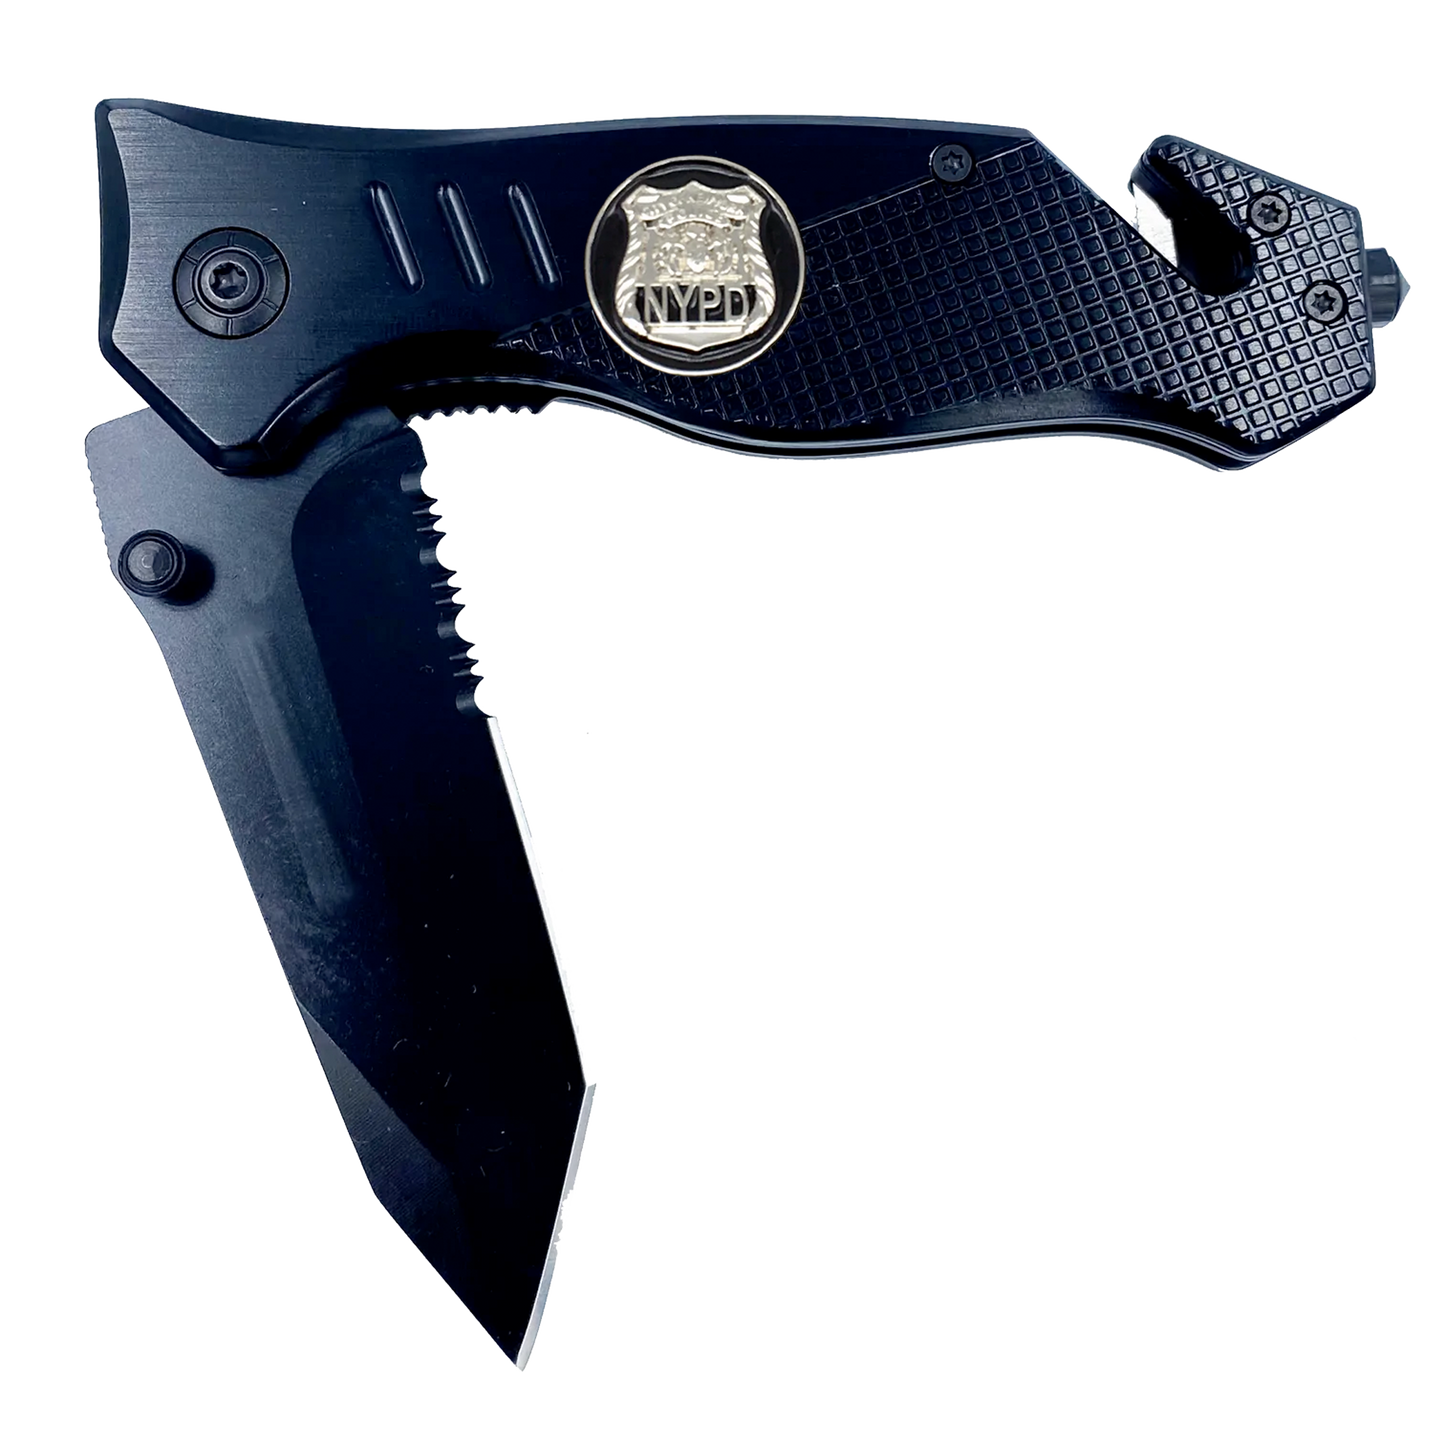 NYPD New York City Police Department Knife 3-in-1 Tactical Rescue knife tool with Seatbelt Cutter, Steel Serrated Blade, Glass